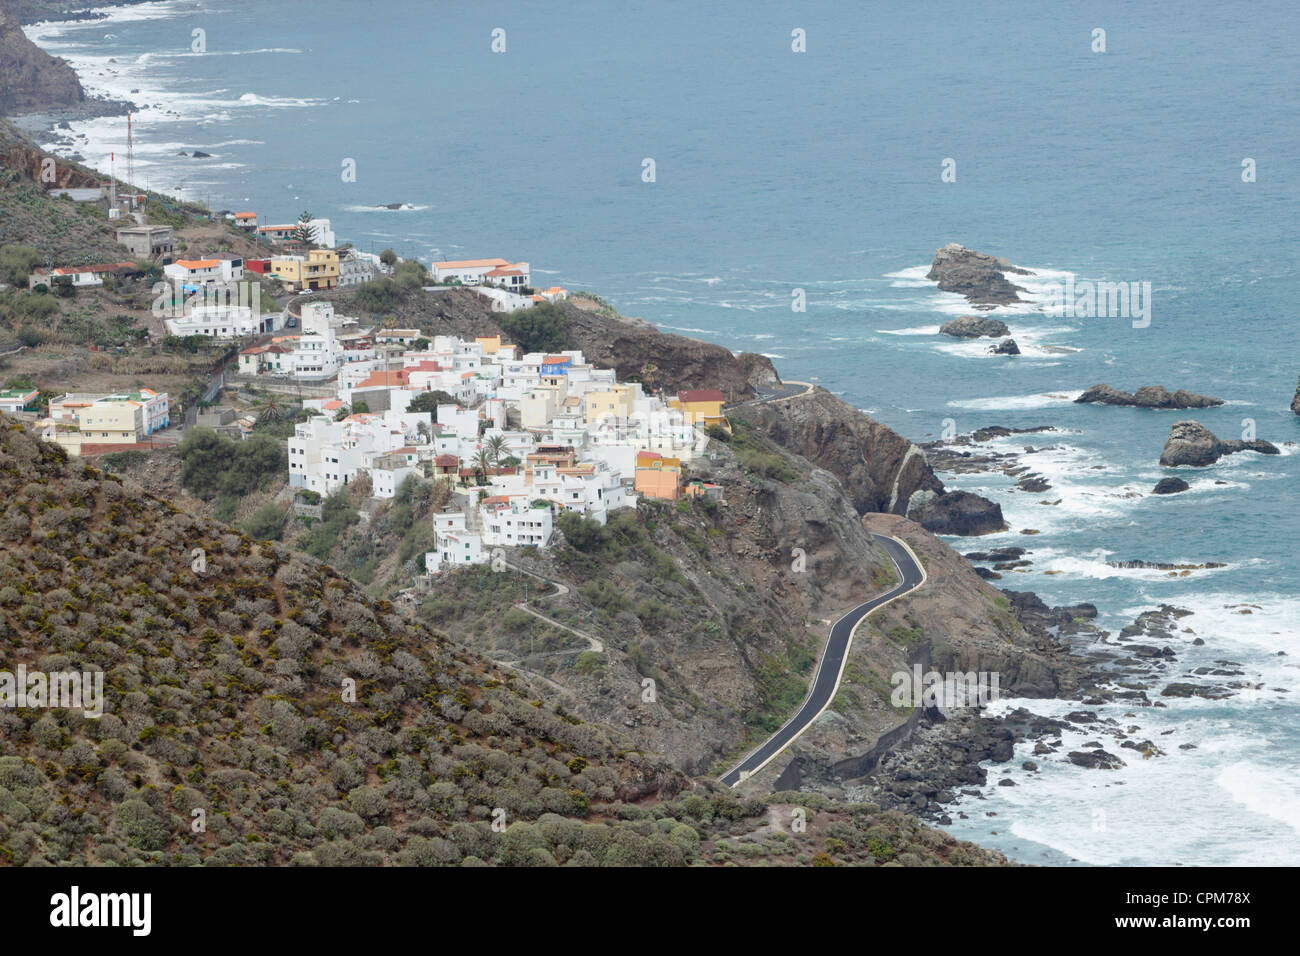 Almaciga village in the Anaga mountains on Tenerife in the Canary Islands, Spain Stock Photo